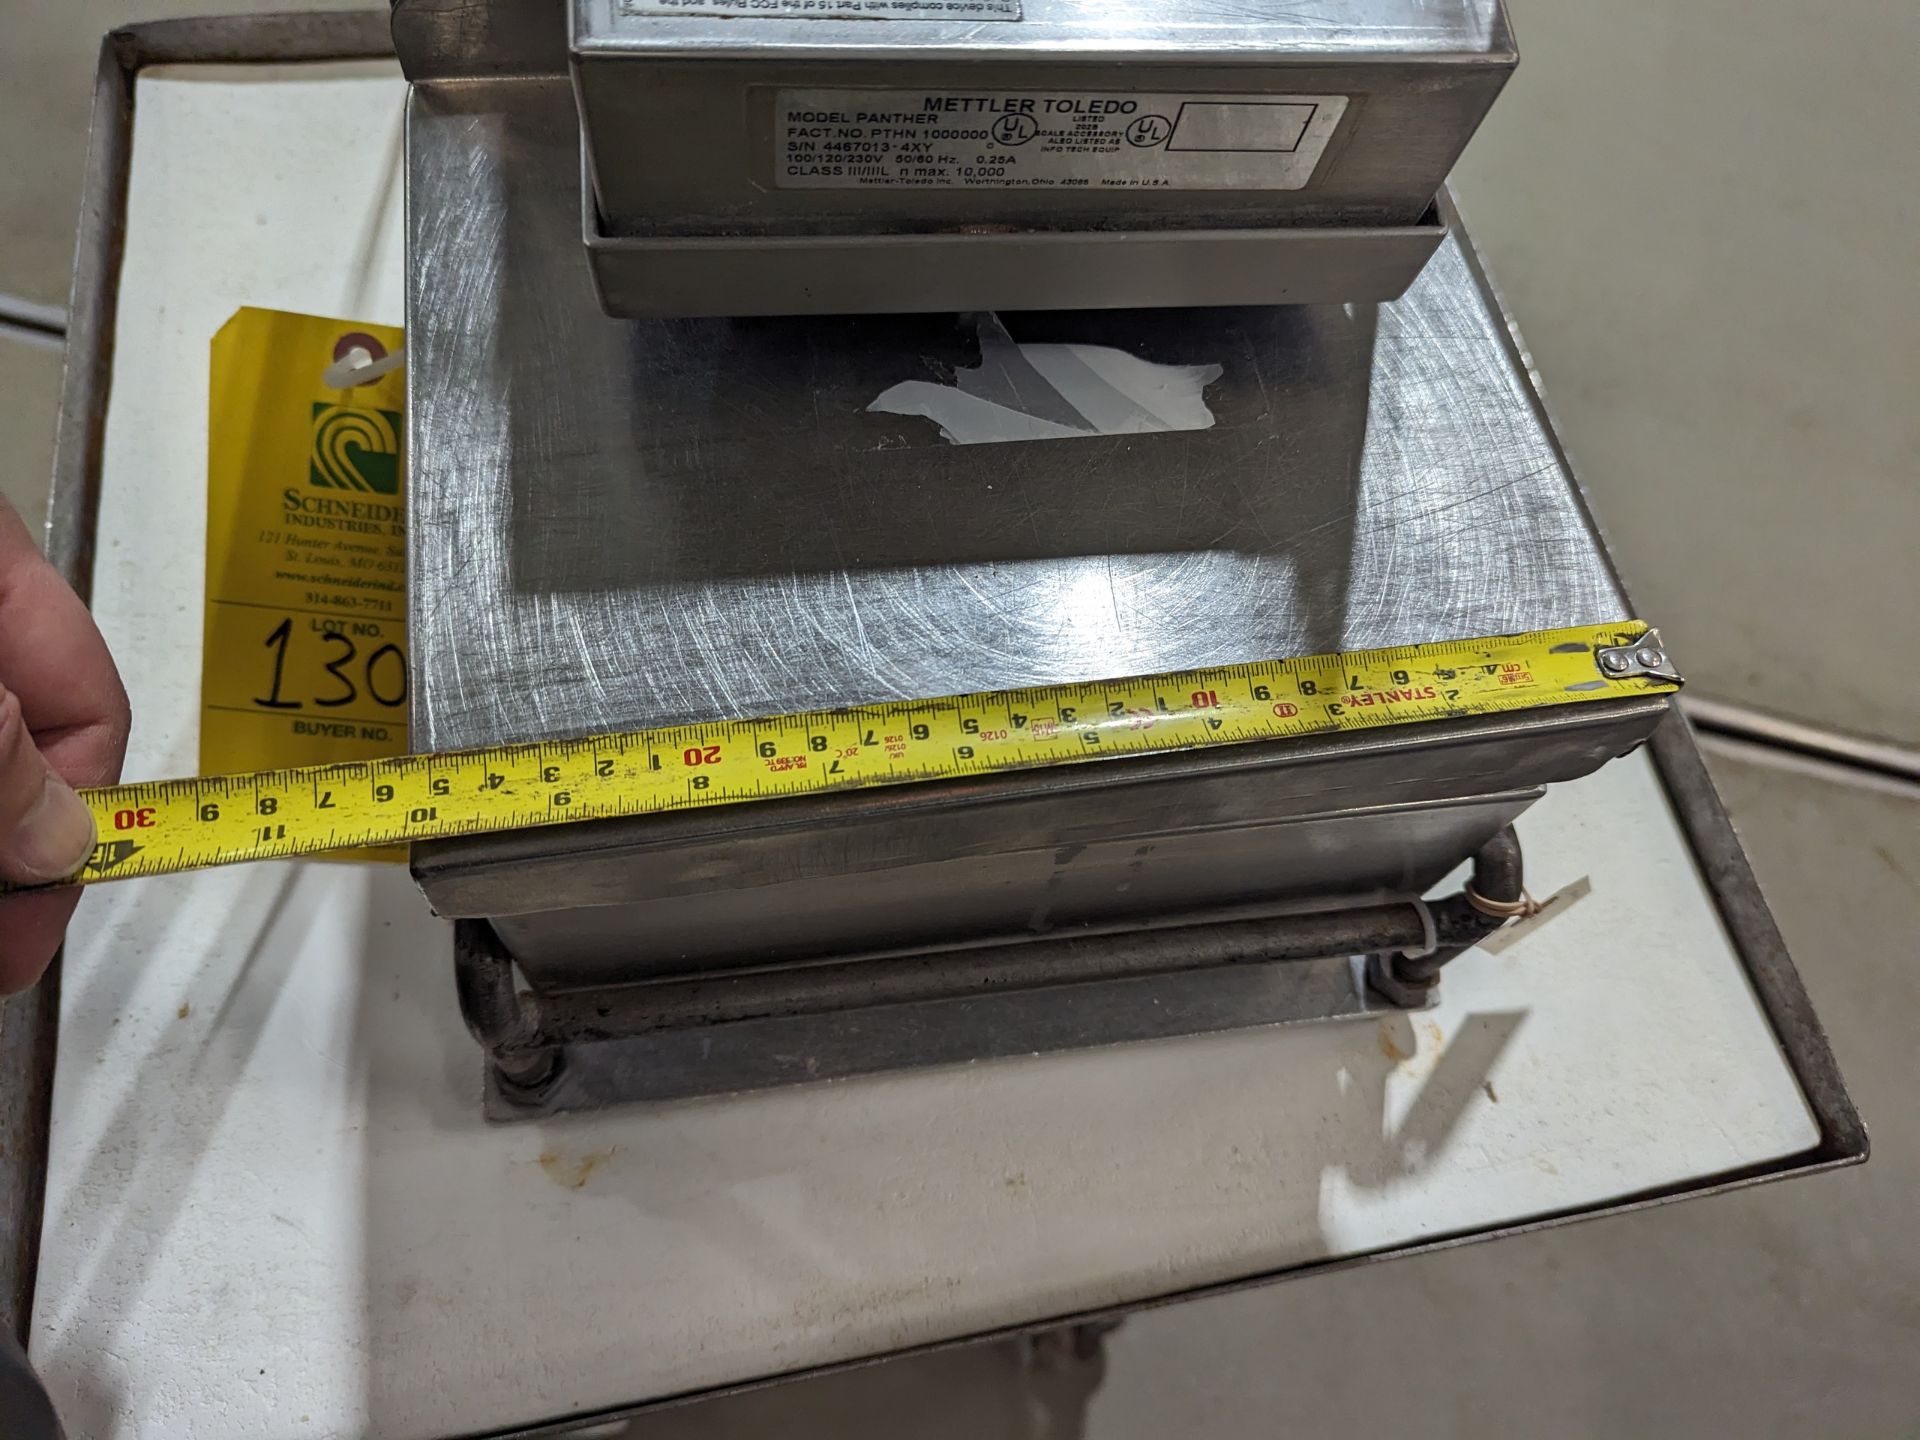 Mettler Toledo Panther 10 x 8 Bench Scale, Dimensions LxWxH: 10x12x19 - Image 4 of 5